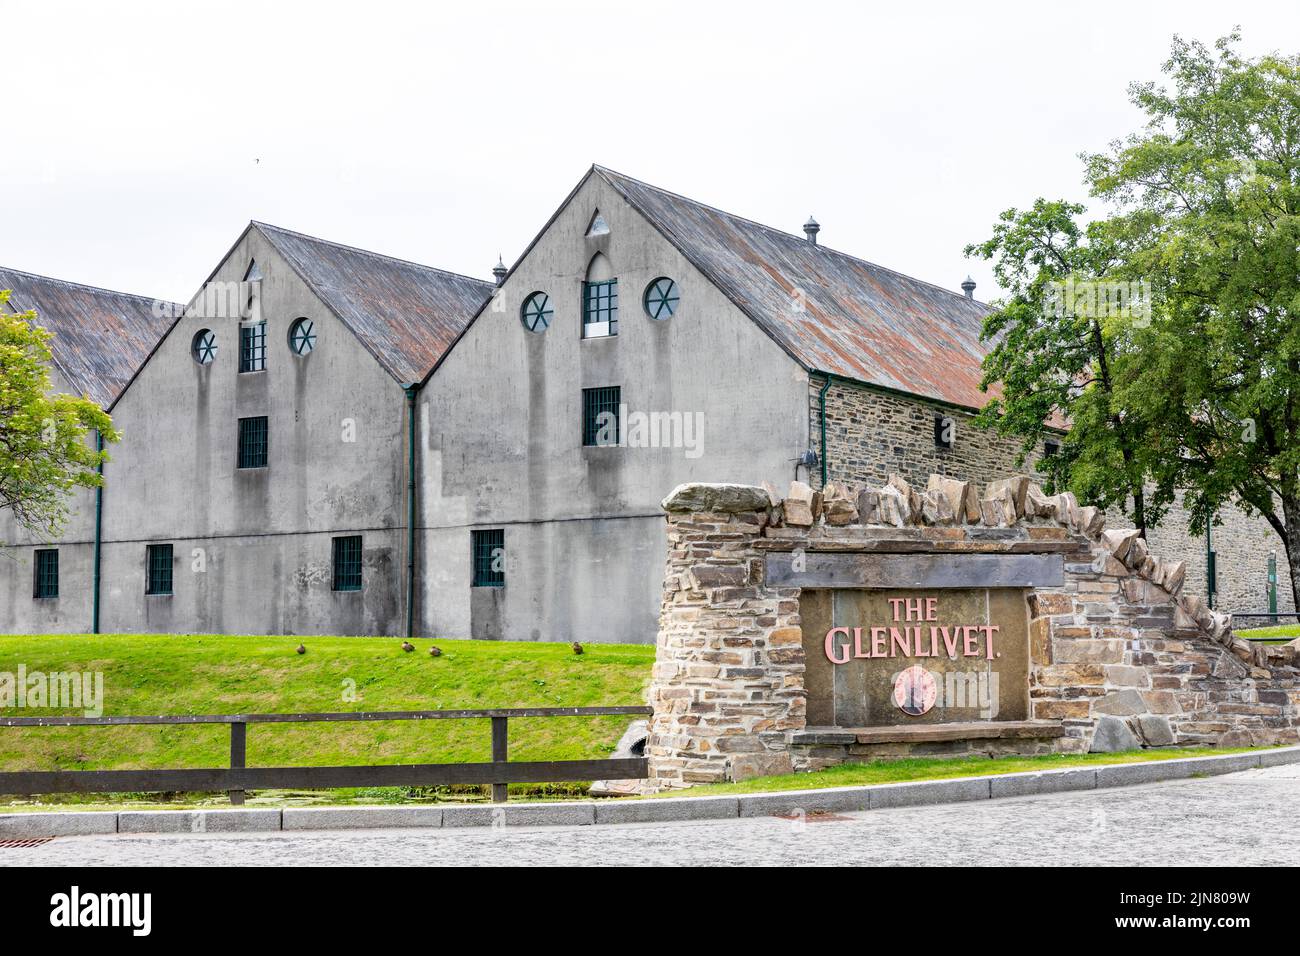 The Glenlivet scotch whisky distillery and visitor centre Stock Photo